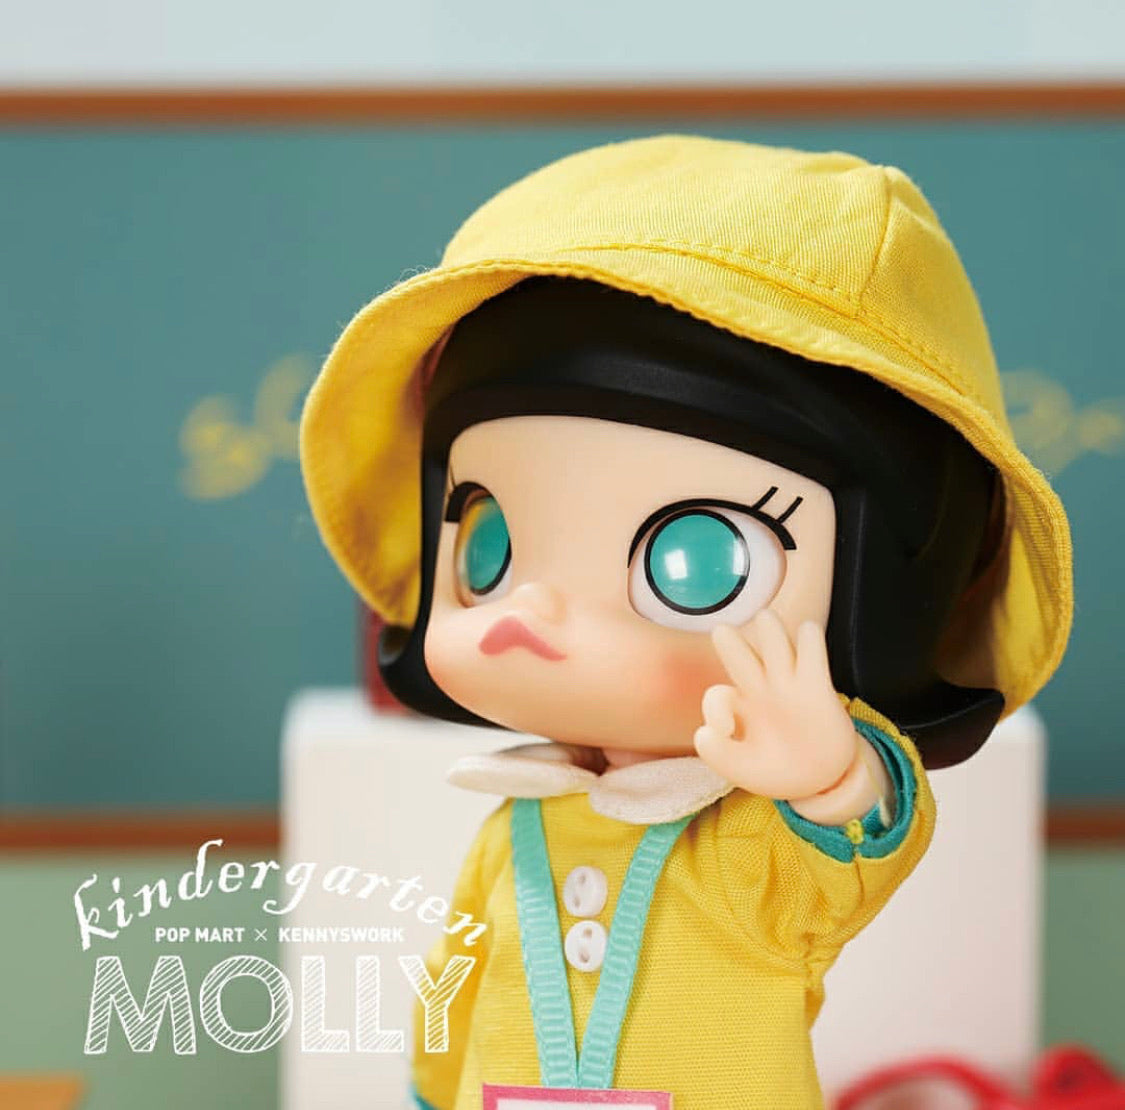 Molly BJD Kindergarten doll with yellow hat, close-up of hands, eyes, and accessories.